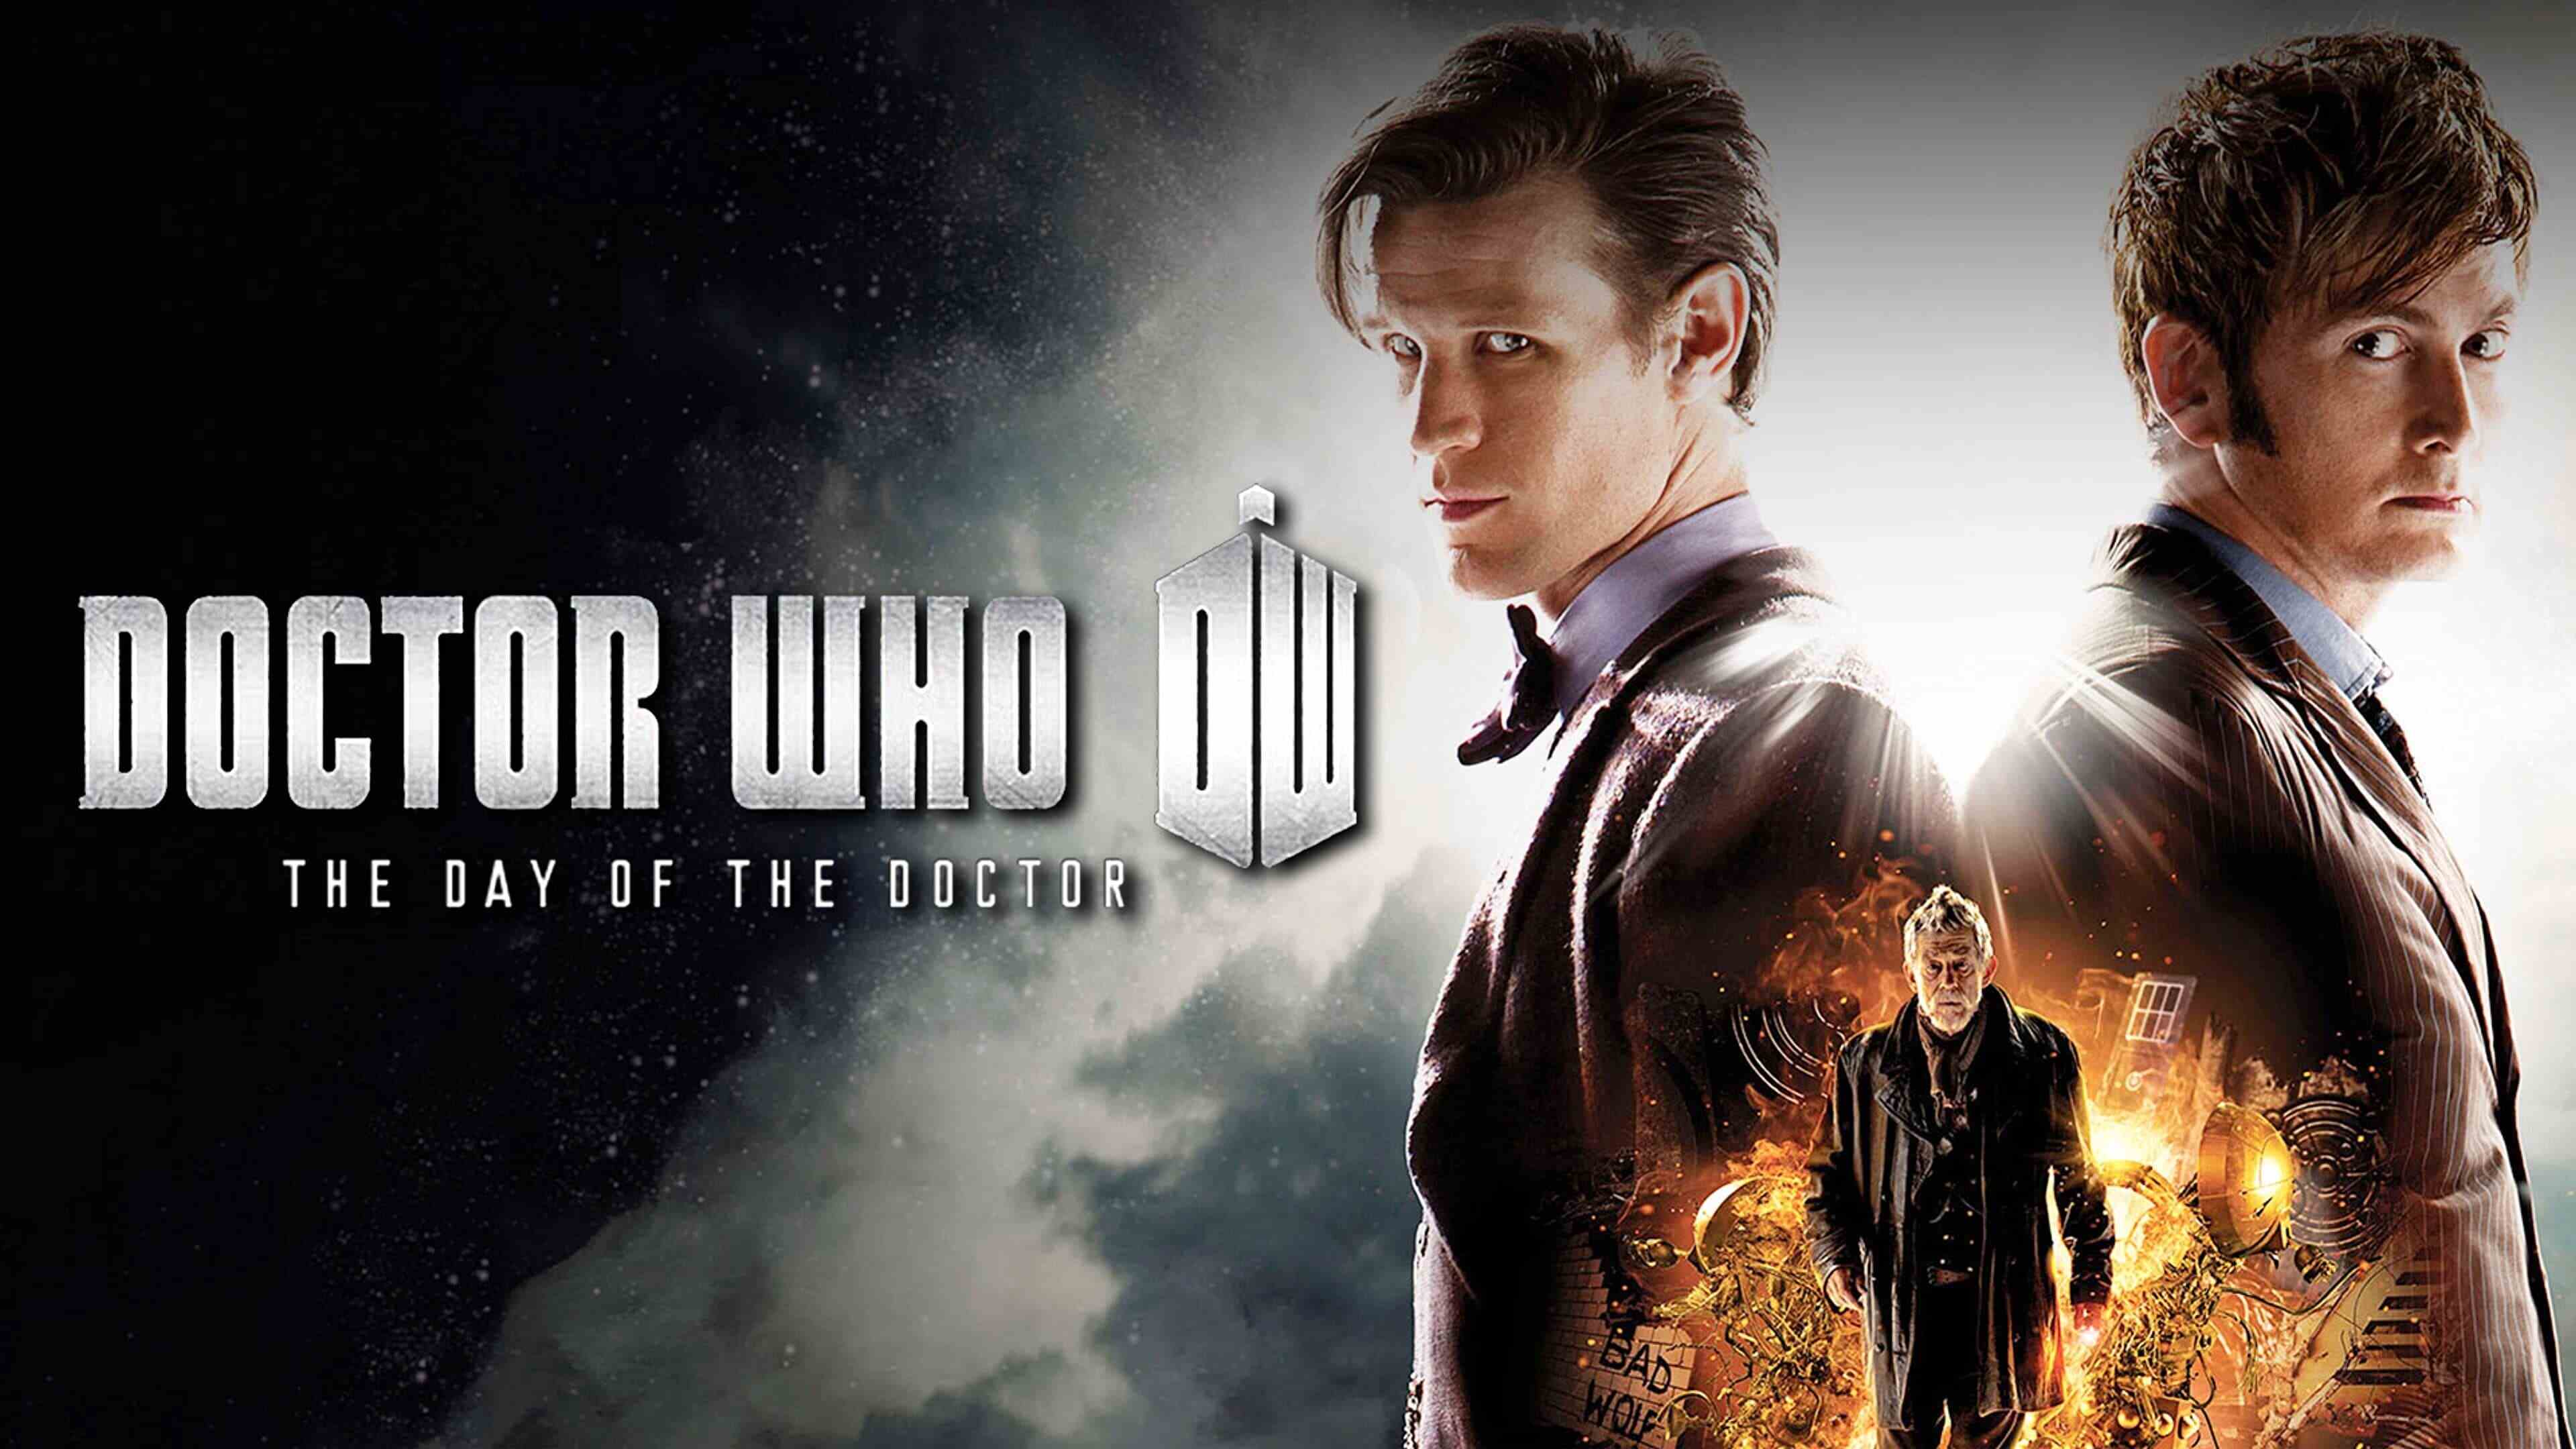 43-facts-about-the-movie-doctor-who-the-end-of-time